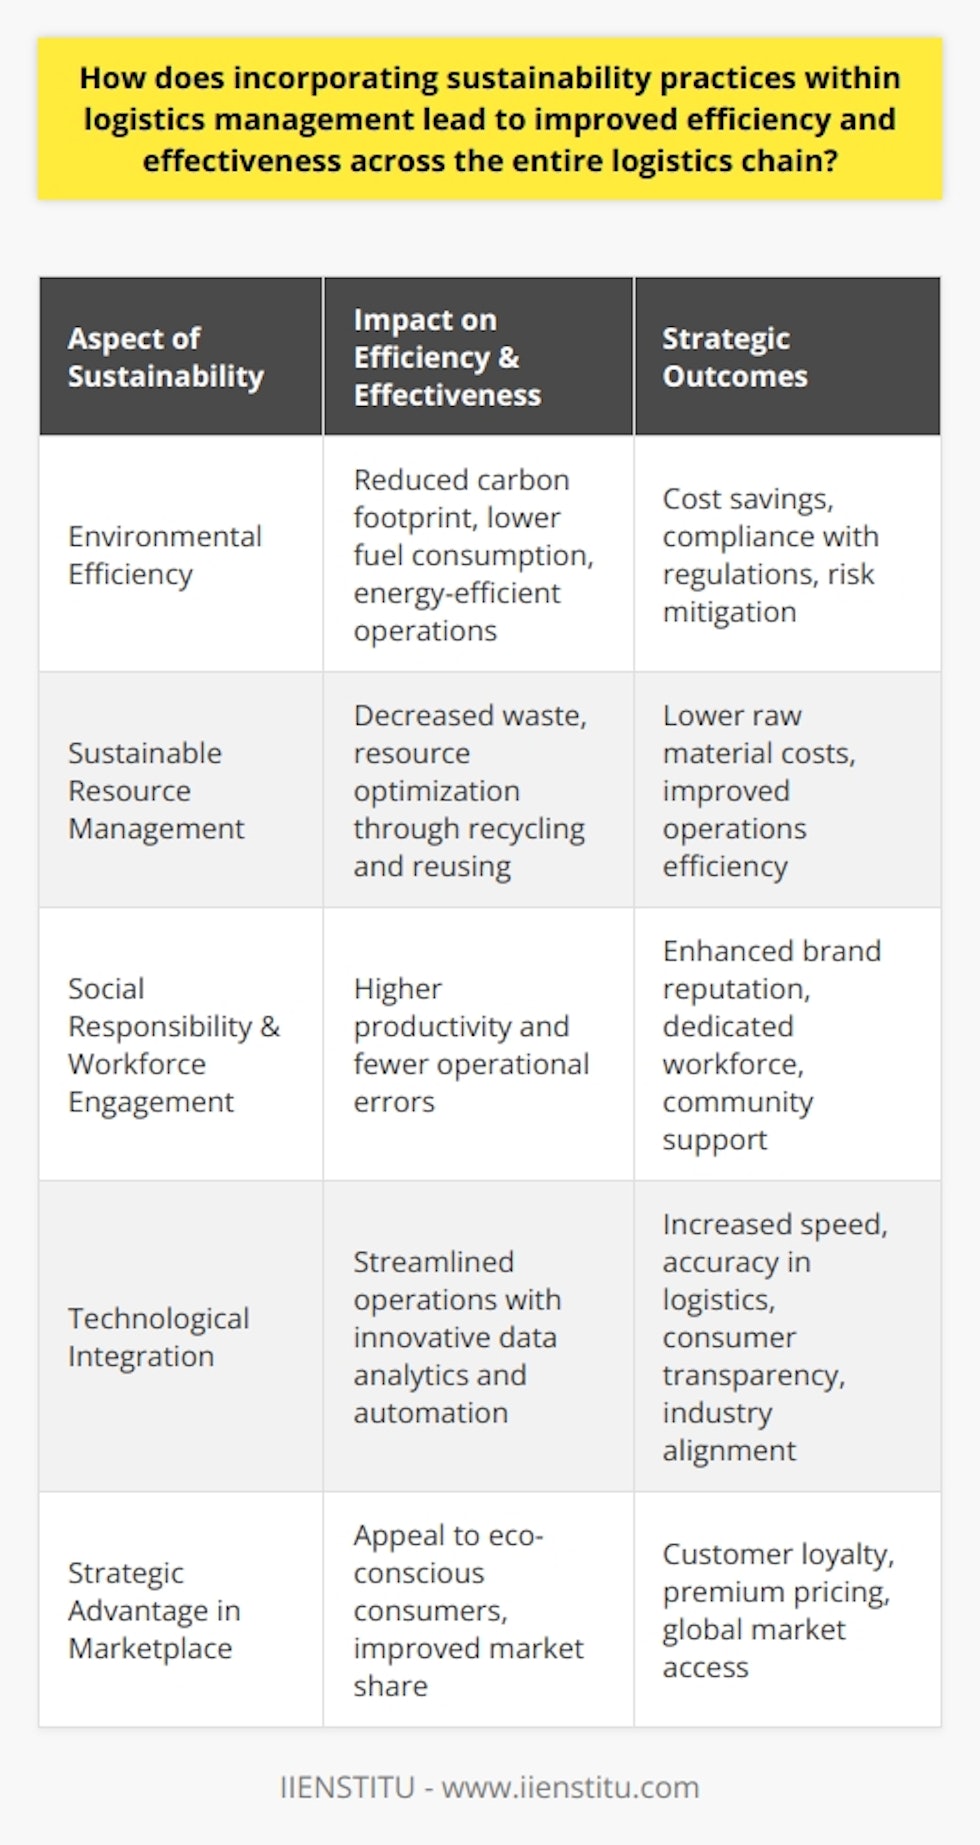 Incorporating sustainability practices within logistics management is not just an environmental or social imperative but also a strategic lever to enhance operational efficiency and effectiveness. By embedding sustainable approaches into the very fabric of logistics operations, companies can drive innovation, optimize resources, and create value across their supply chain networks. Here's how sustainability leads to improved efficiency and effectiveness in logistics:Environmental Efficiency through Sustainable OperationsAdopting eco-friendly strategies in logistics can significantly lower the carbon footprint and improve resource utilization. Efficient vehicle routing, for instance, reduces fuel consumption and minimizes greenhouse gas emissions. Additionally, investing in a modern, energy-efficient fleet and optimizing warehouse operations to decrease energy usage results in both environmental benefits and cost savings. The shift to renewable energy sources or biodegradable packaging not only aligns logistics activities with regulatory requirements but also demonstrates environmental stewardship, which can yield long-term savings and risk mitigation.Sustainable Resource ManagementEffective management of resources is crucial in sustainable logistics. This involves a careful analysis of material flows and the implementation of a circular economy model where possible. By focusing on the lifecycle of products and packages, companies can reduce, reuse, and recycle resources, thereby minimizing waste and lowering operational costs. Companies embracing these practices often experience a reduction in raw material expenditures and an improvement in the efficiency of their overall logistics operations.Social Responsibility and Workforce EngagementResponsibility towards society and the rights and well-being of workers is gaining prominence within the logistics sector. By ensuring fair labor practices and safe working conditions, companies can enhance their brand reputation and secure a dedicated and efficient workforce. Engaged employees are likely to be more productive and less prone to errors or incidents, which translates into smoother logistics operations. Moreover, respecting the communities in which a company operates, including upholding ethical supply chain practices, can foster local support and improve the resilience and smooth functioning of logistics activities.Technological Integration for Forward-thinking LogisticsSustainability also involves investing in future-ready technological solutions that streamline logistics operations. For instance, incorporating advanced data analytics for dynamic route planning can significantly enhance transport efficiency. Automating warehouses with the latest technologies can improve speed and accuracy in inventory management. Furthermore, investing in blockchain for better supply chain transparency or IoT devices for real-time tracking can enable companies to meet the growing expectations of consumers for transparency and sustainability.Strategic Advantages in a Competitive MarketplaceCompanies that prioritize sustainability can differentiate themselves in a crowded and competitive marketplace. Consumers increasingly prefer products from socially and environmentally conscious entities. This preference can translate into increased customer loyalty, higher market share, and potentially premium pricing opportunities for sustainable services. Moreover, sustainable logistics practices can align companies with international standards and global market access, especially as environmental regulations become more stringent worldwide.In sum, weaving sustainability into the fabric of logistics management doesn't just mitigate environmental impacts and promote social good; it is also a business imperative that can lead to substantial benefits in efficiency and effectiveness. Enterprises that recognize this nexus between sustainability and operational excellence are poised to thrive in a rapidly evolving global marketplace, thereby securing a competitive edge while contributing to a more sustainable and responsible logistics industry.